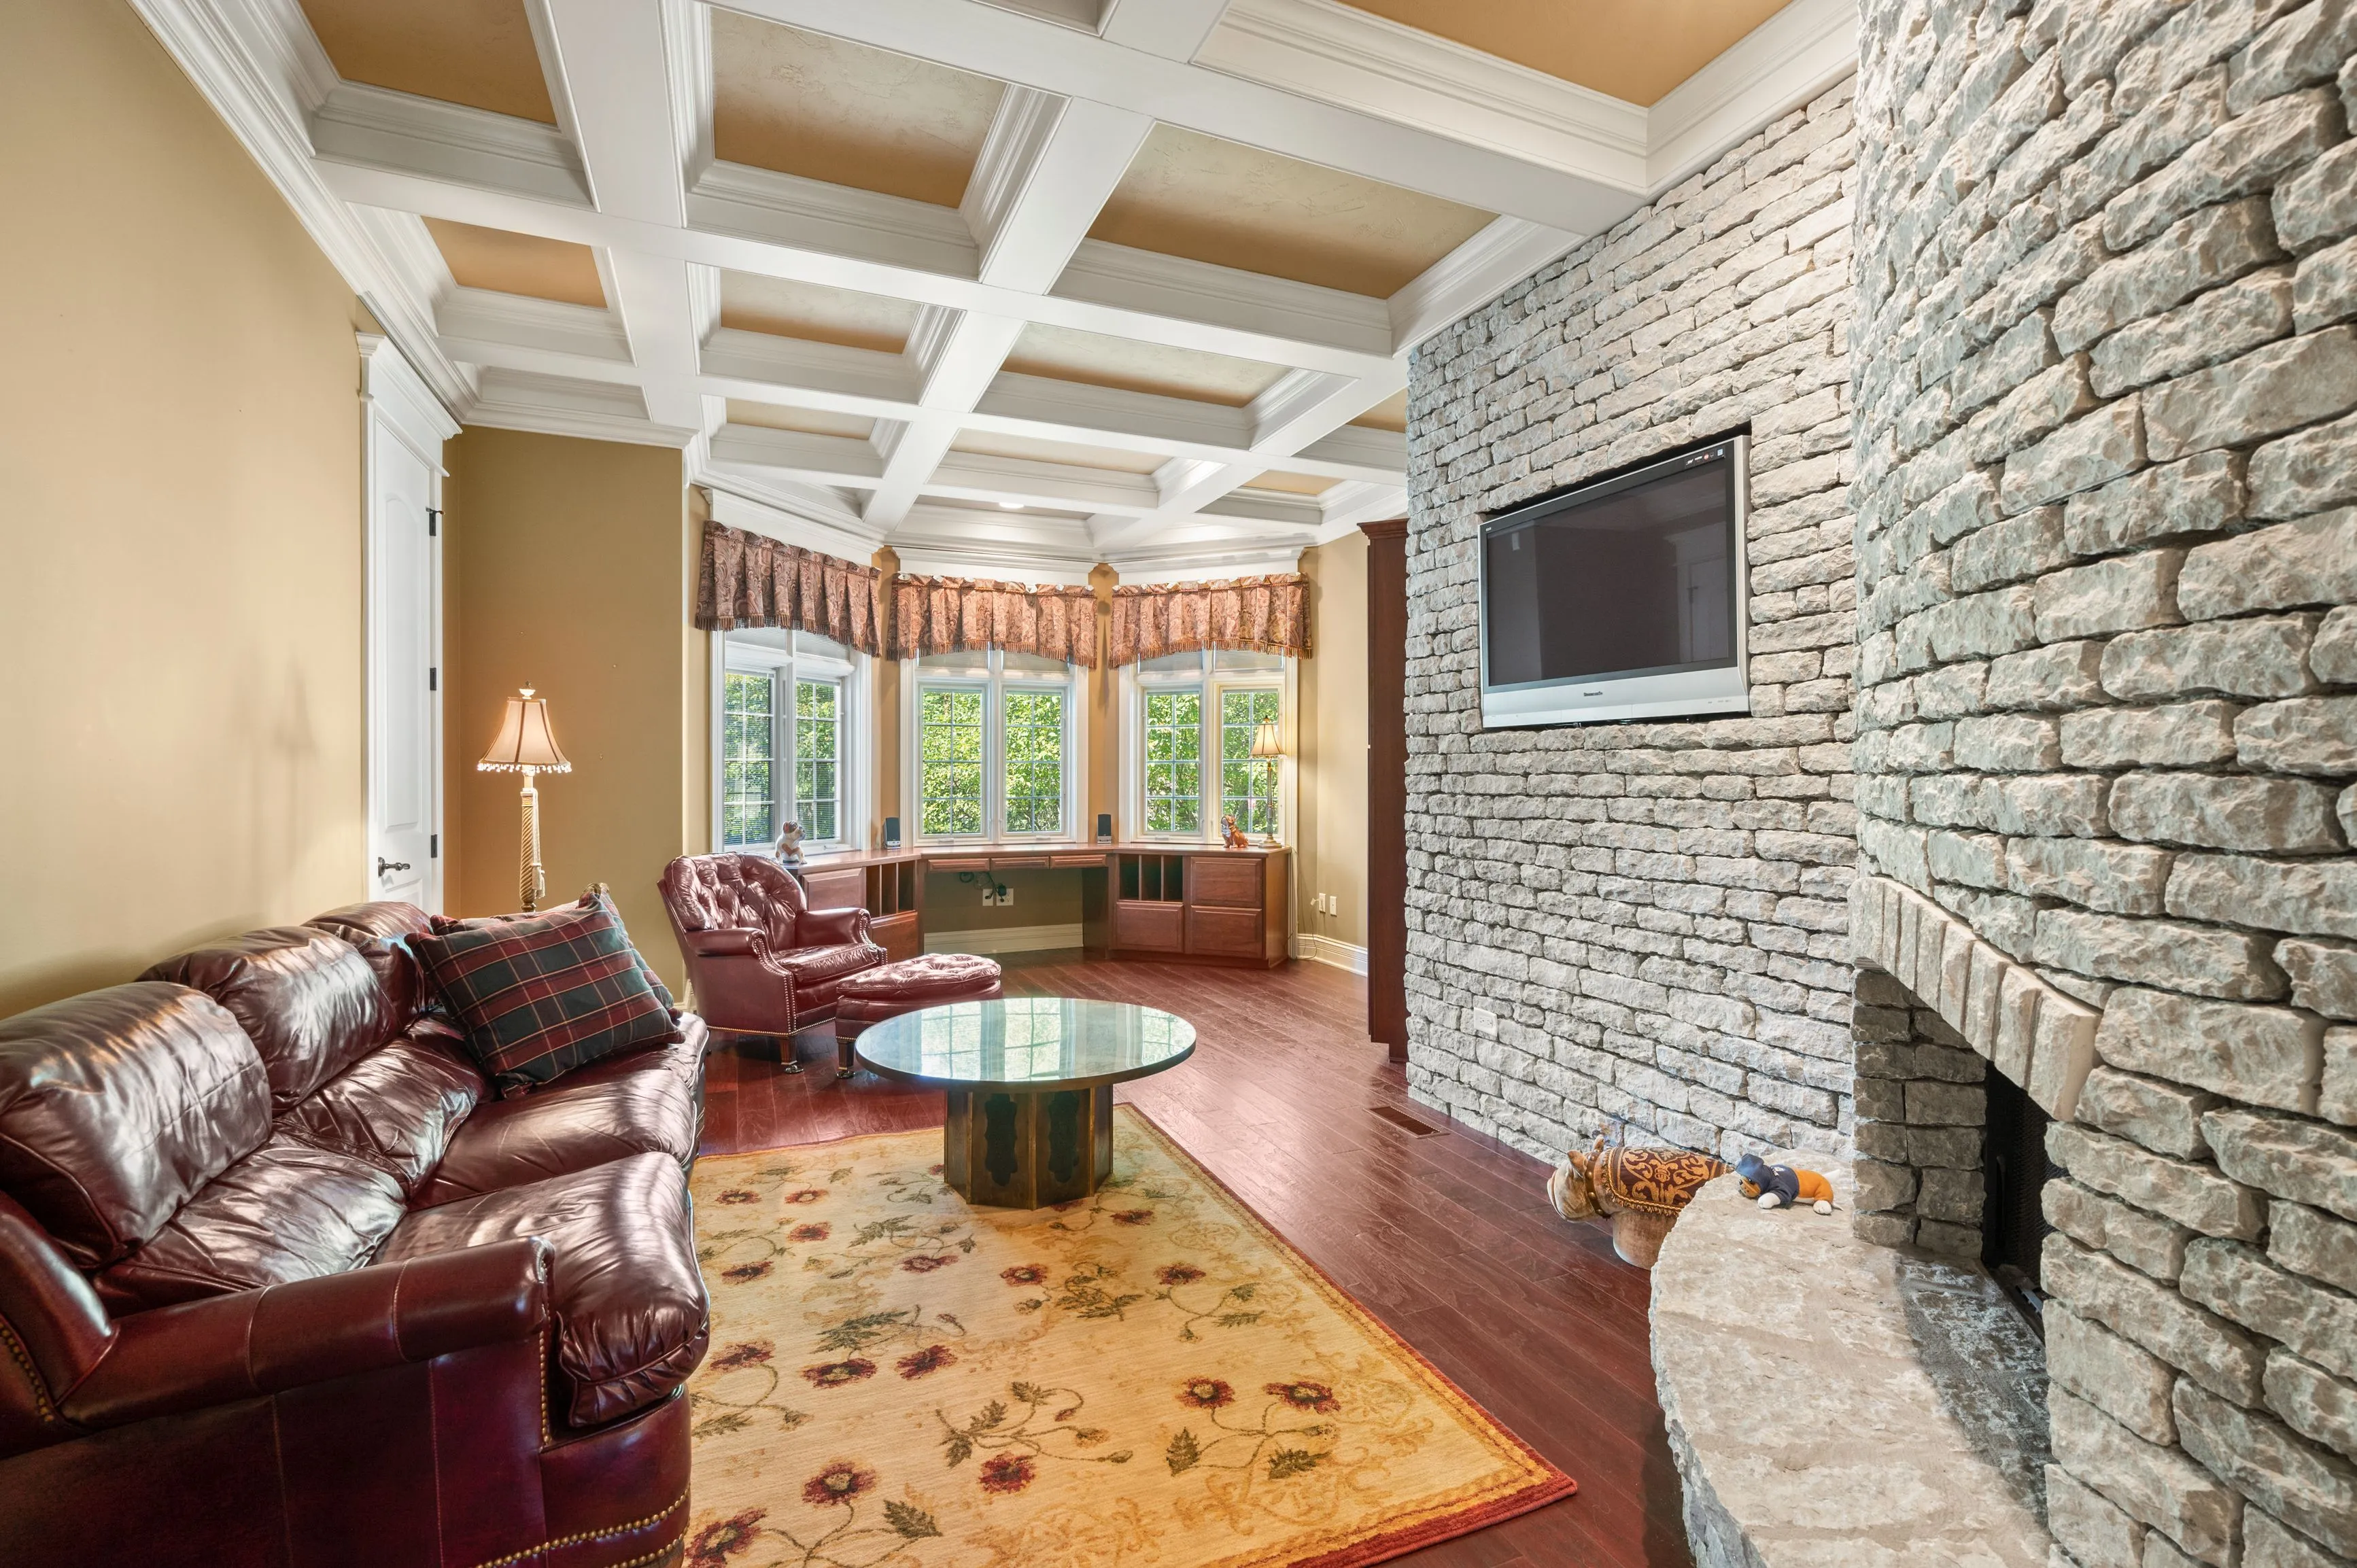 Elegant living room with coffered ceiling, stone fireplace, leather sofas, hardwood floors, and a bay window.